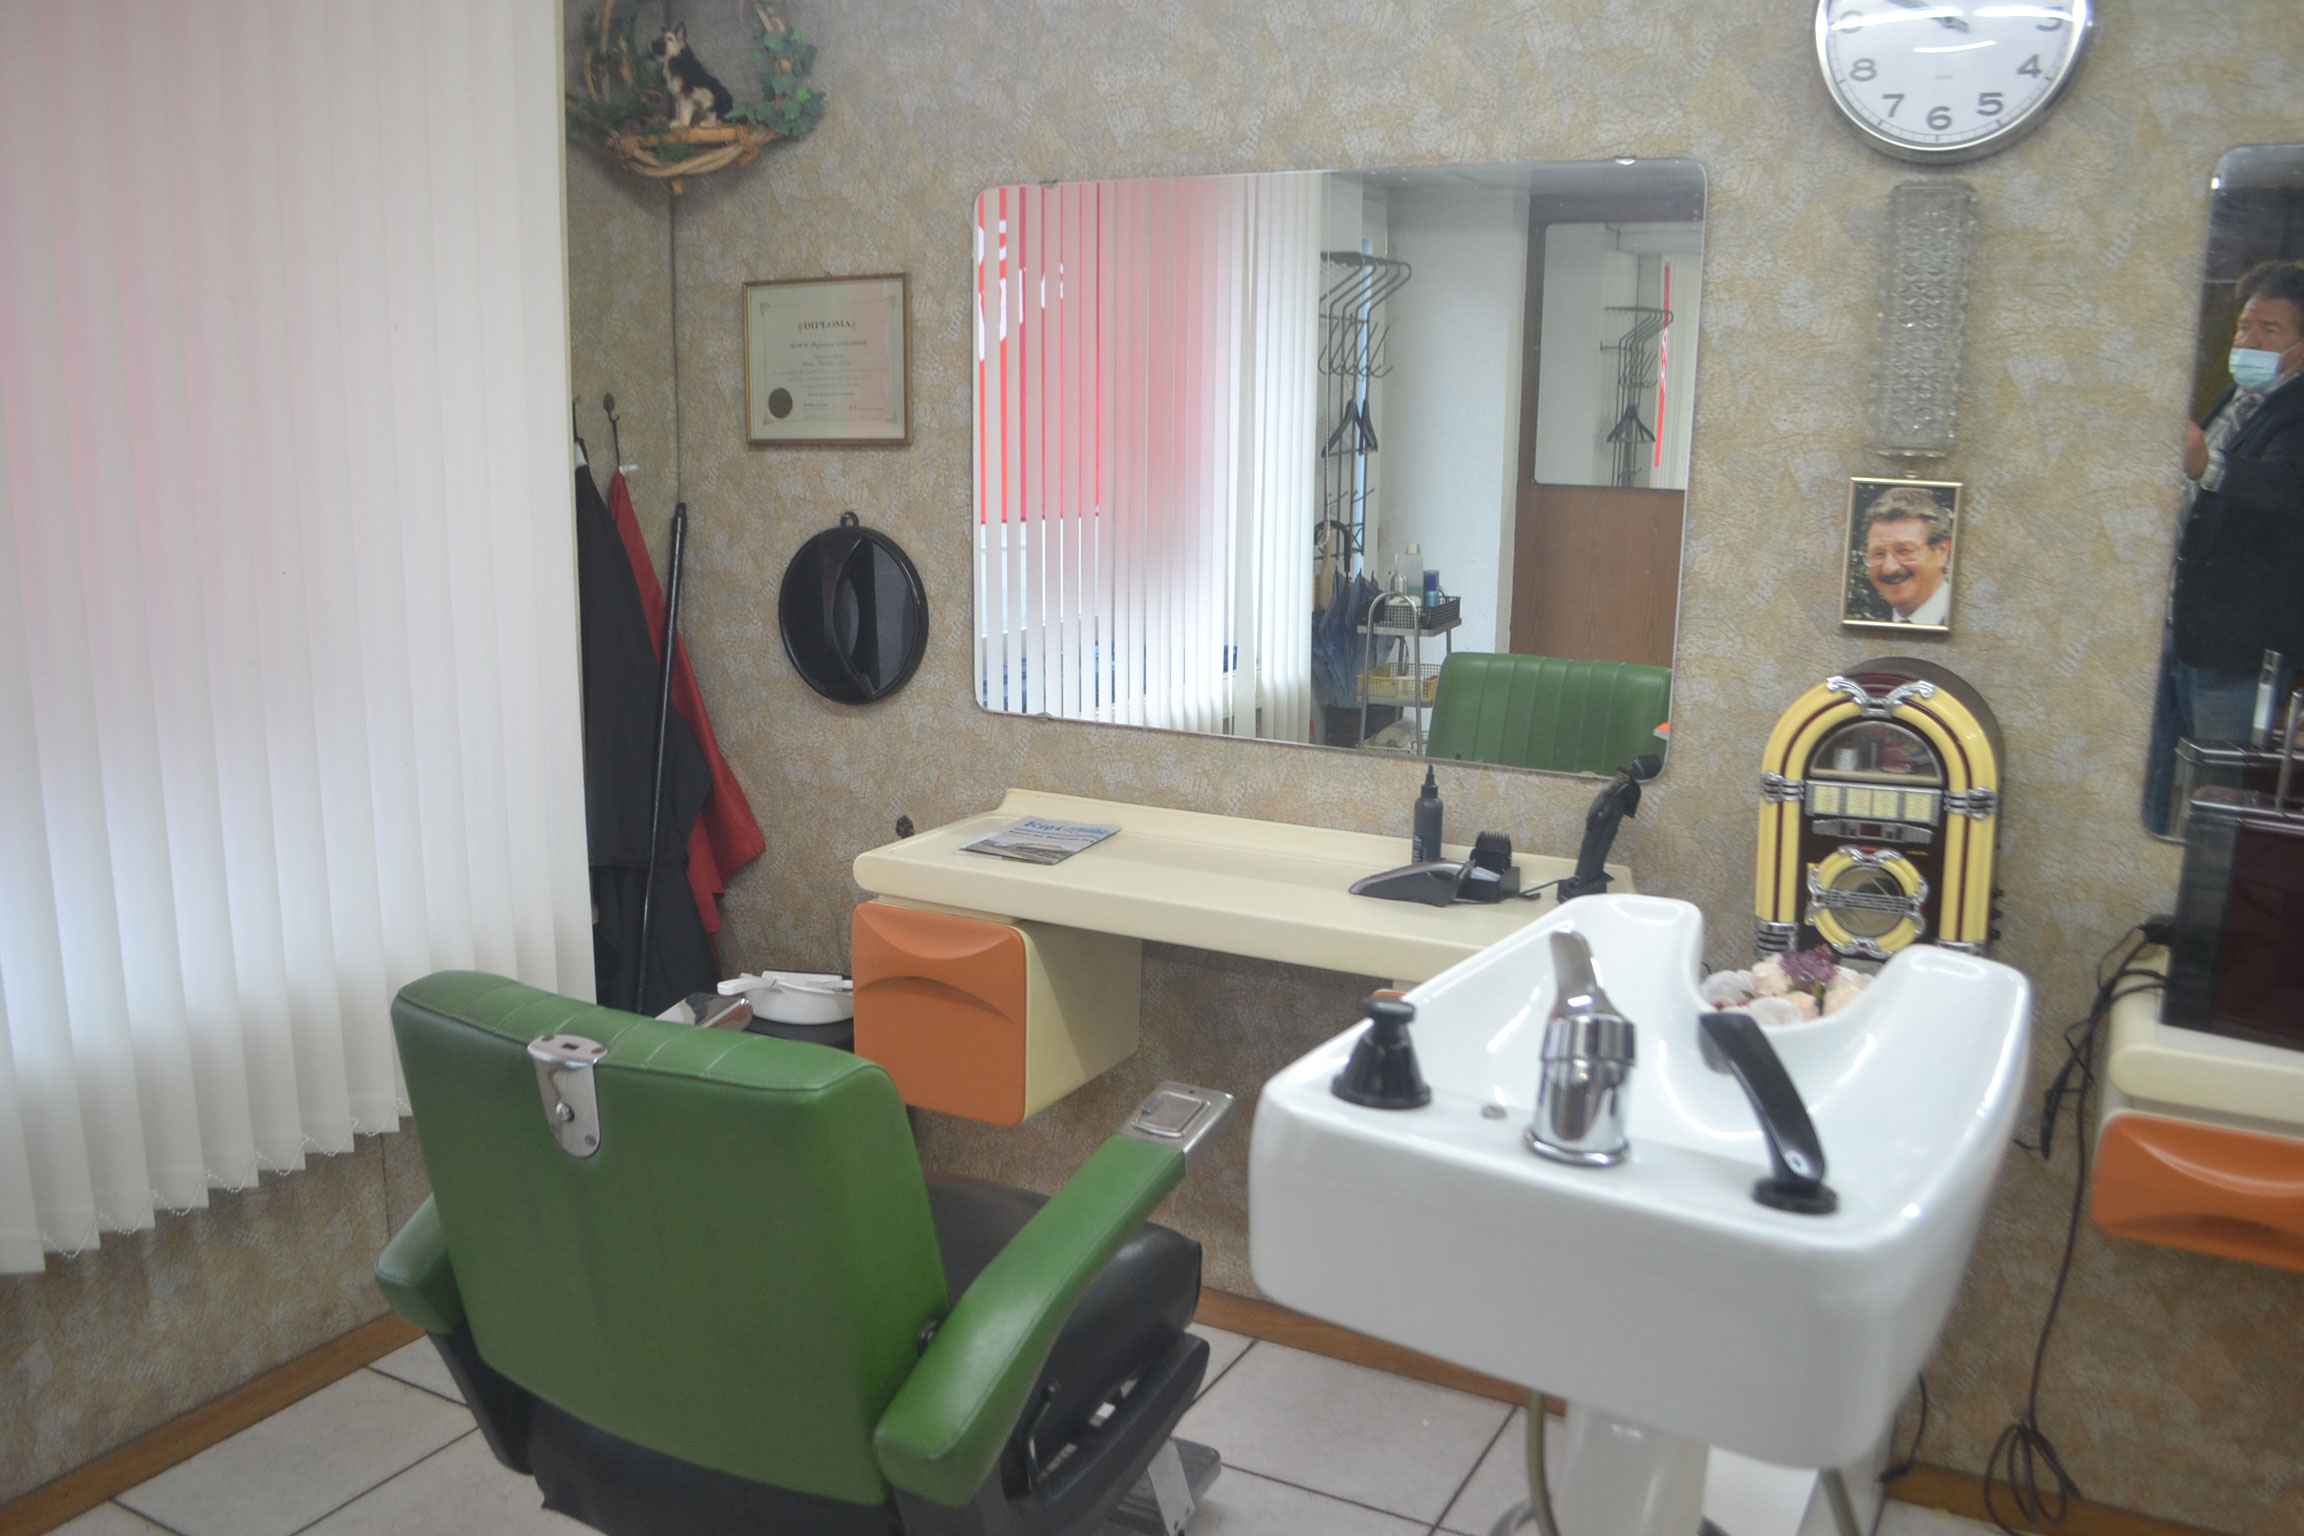 Coiffeur Kuster